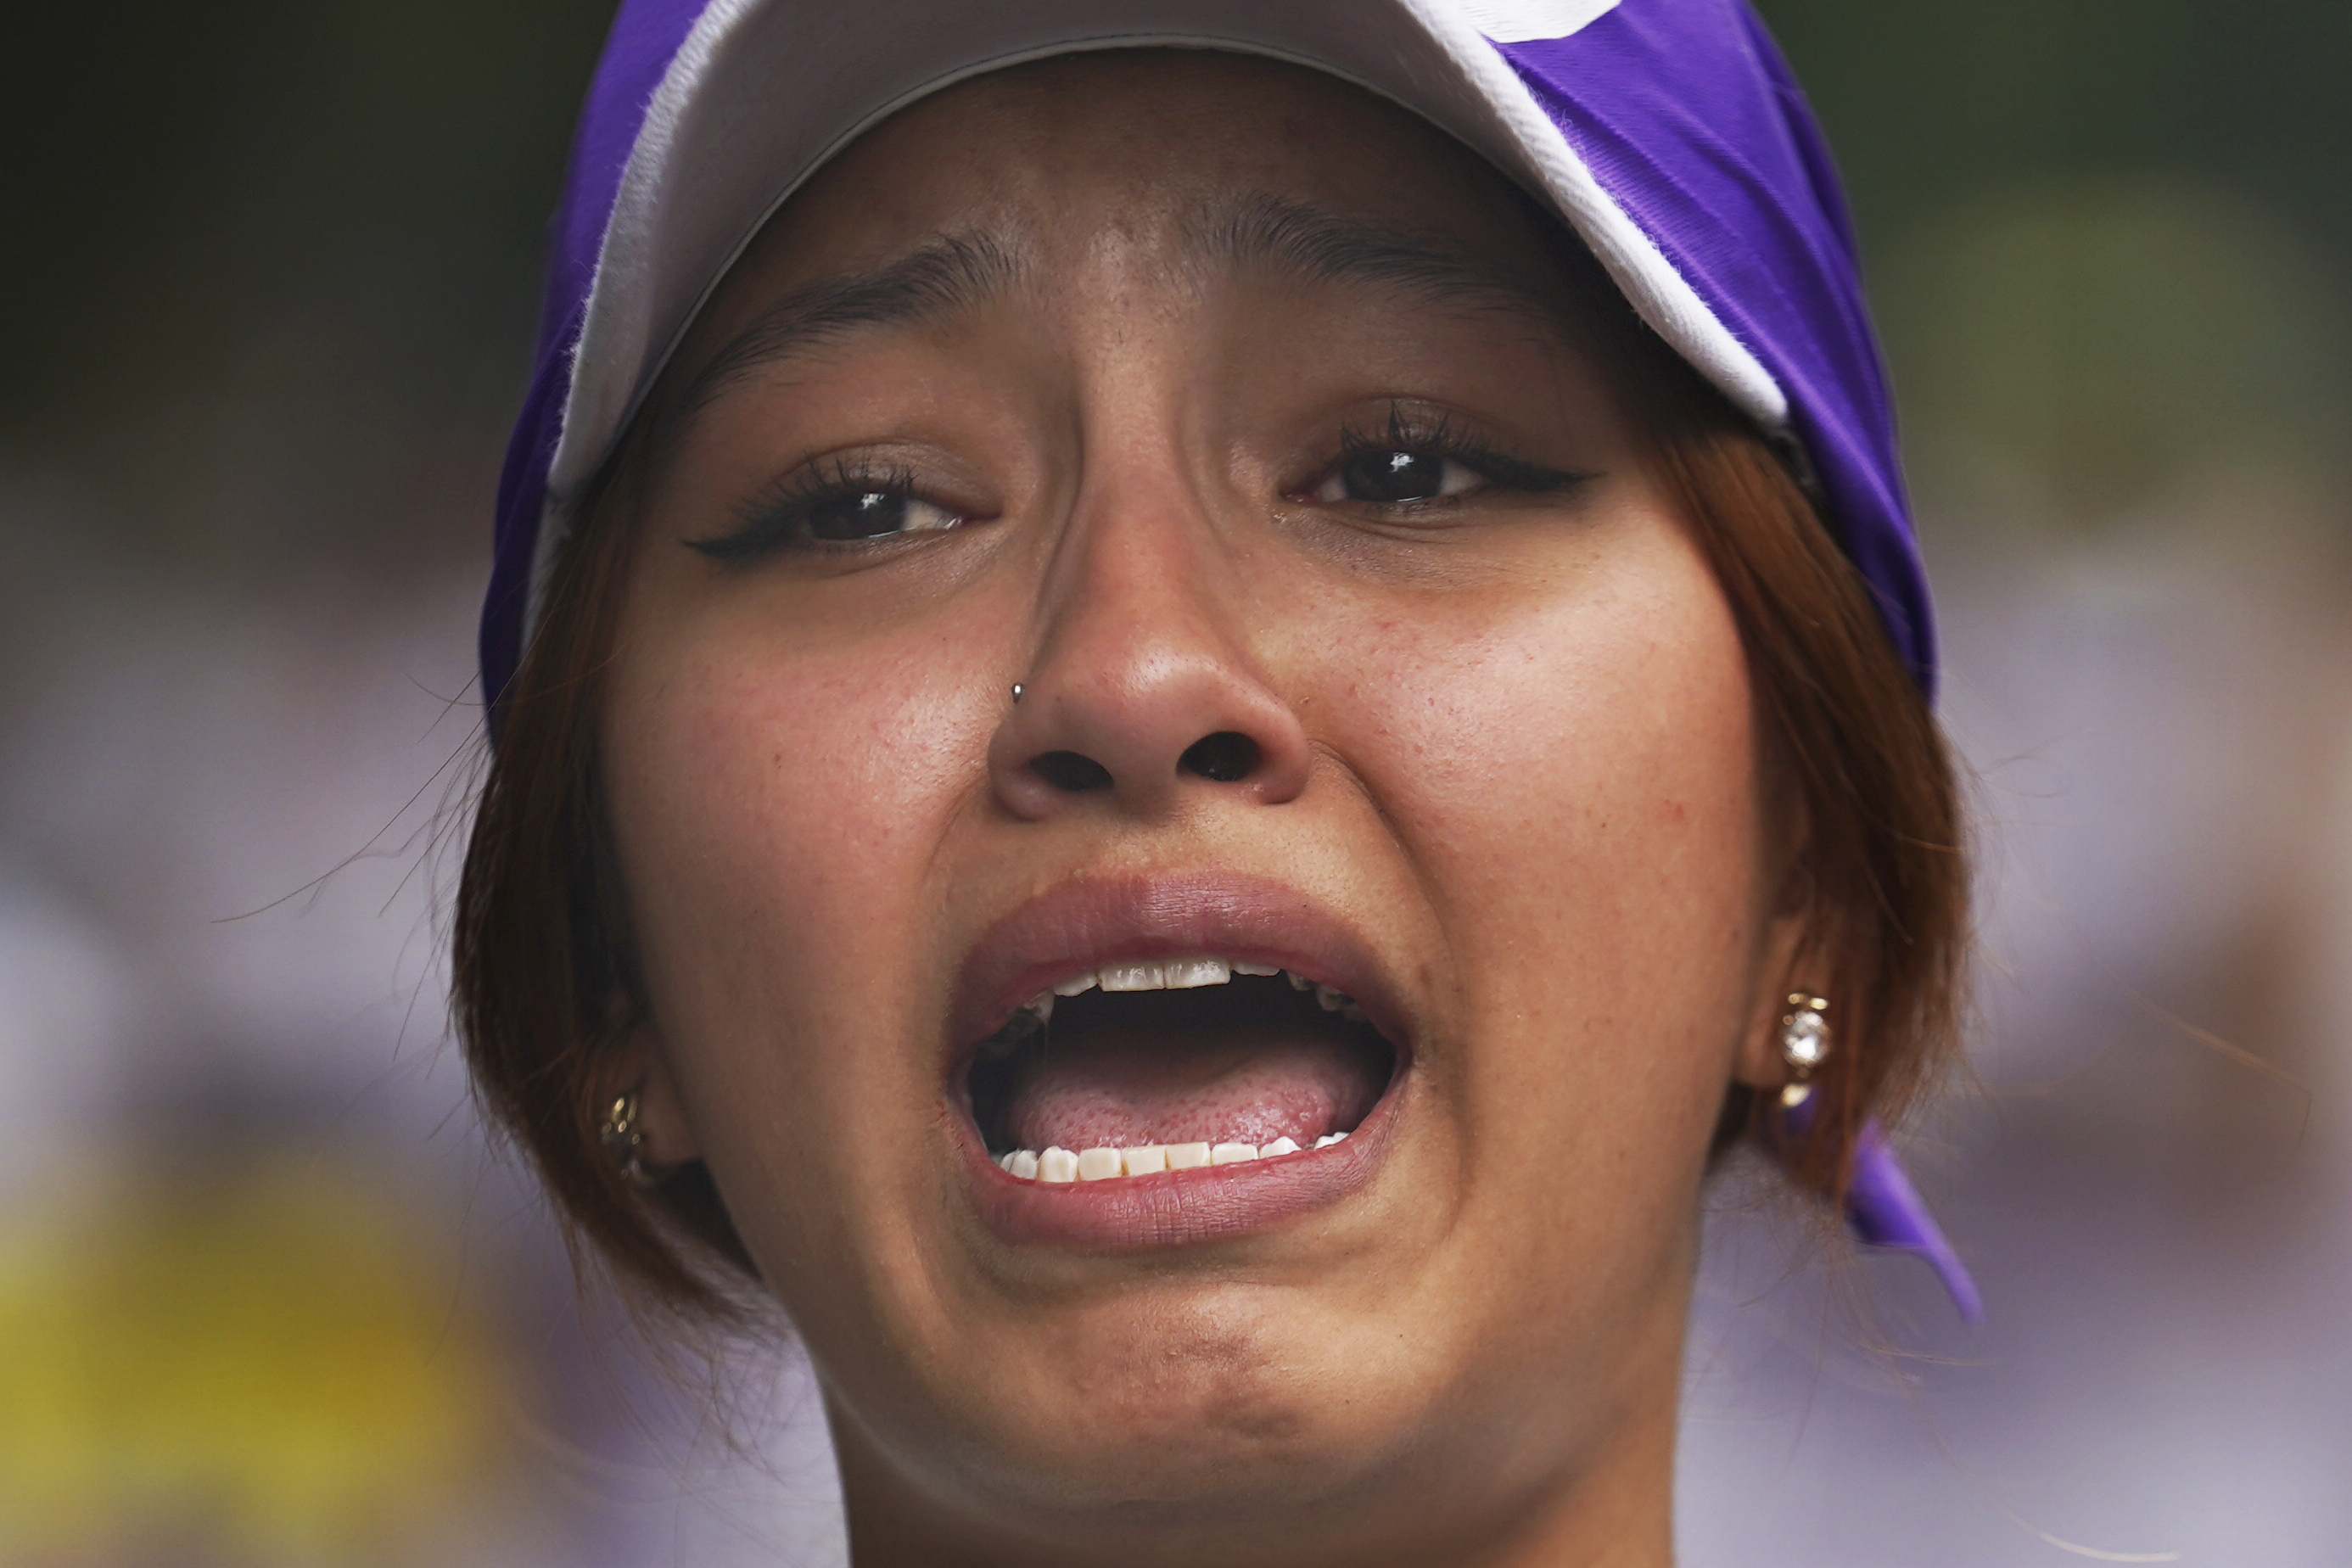 Vania Hernández Portillo, daughter of a disappeared woman, participates with mothers of the disappeared in a march to demand government help to find their loved ones, coinciding with the celebration of Mother's Day, in Mexico City, on May 10, 2023. (AP Photo/Marco Ugarte)